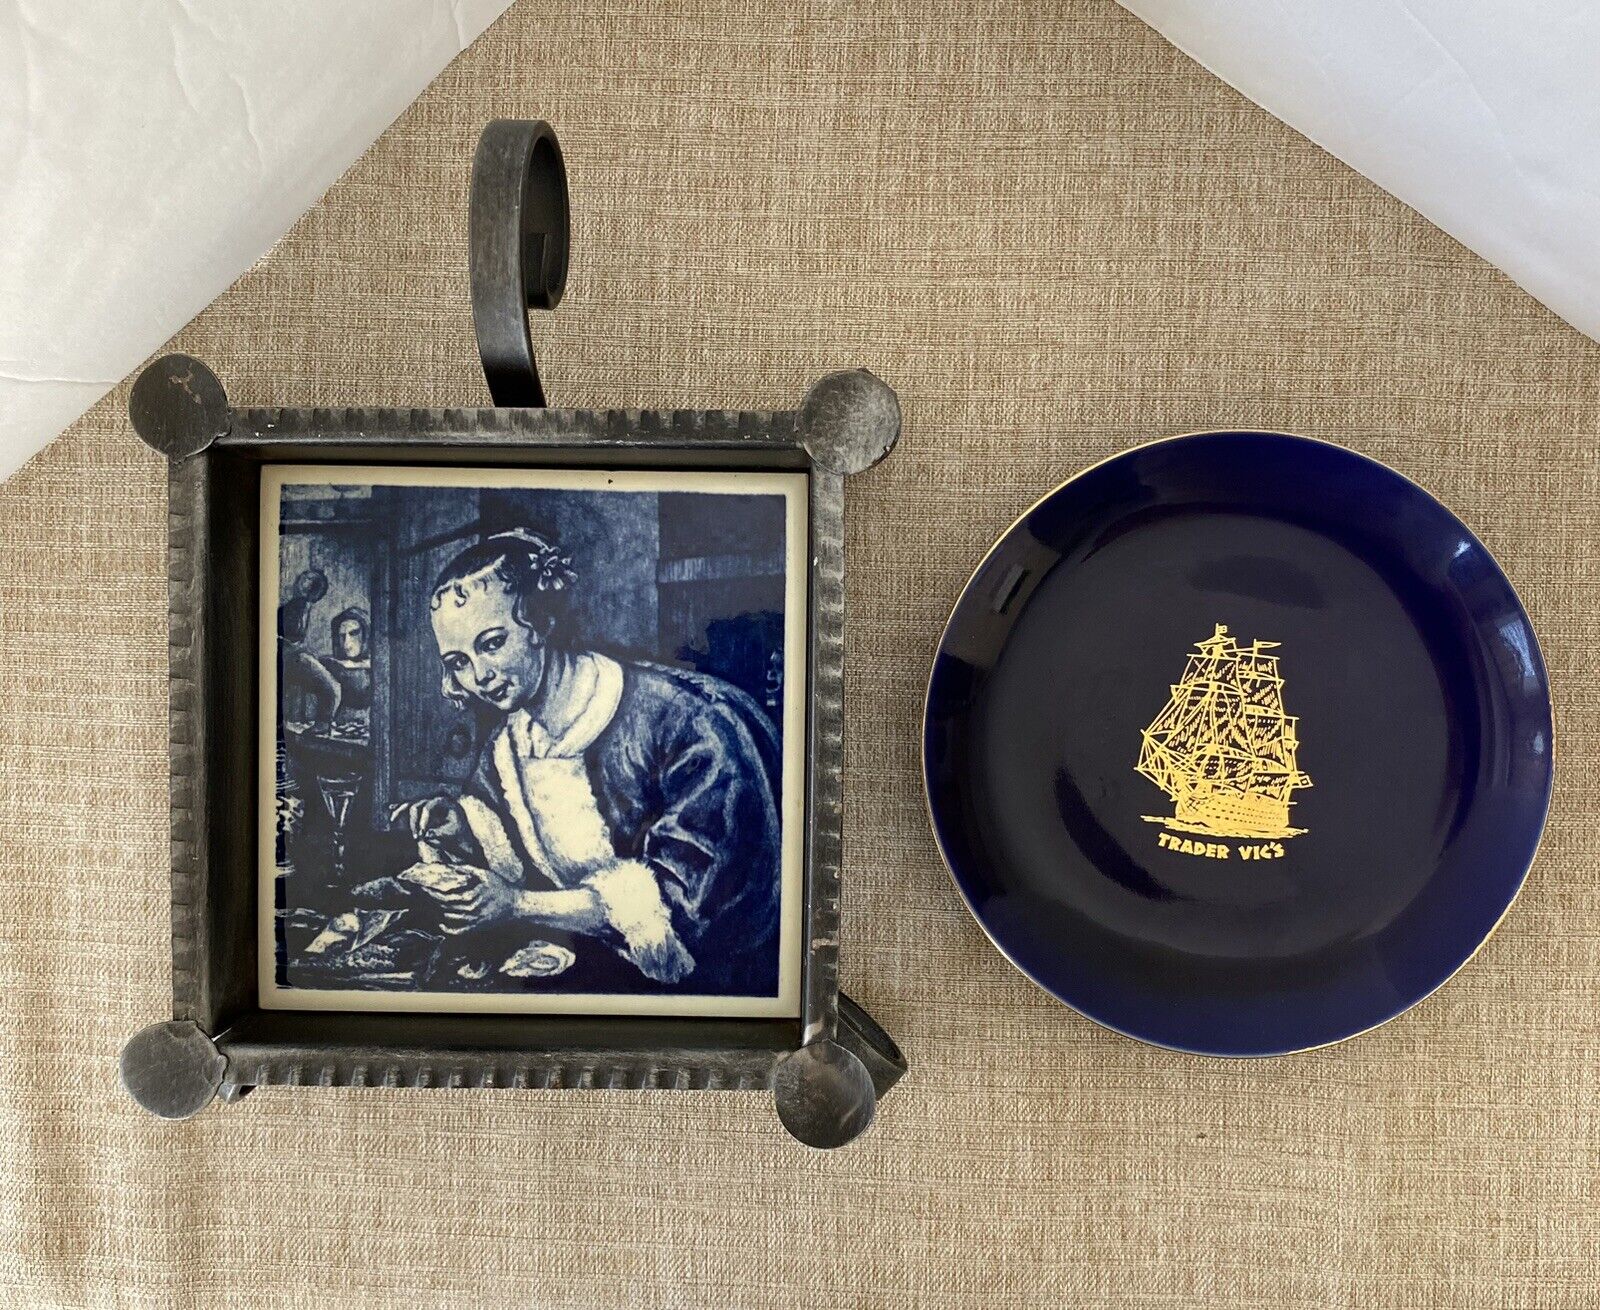 Girl Eating Oysters Tile Metal Ash Tray? Trader Vic Small Plate Read Description